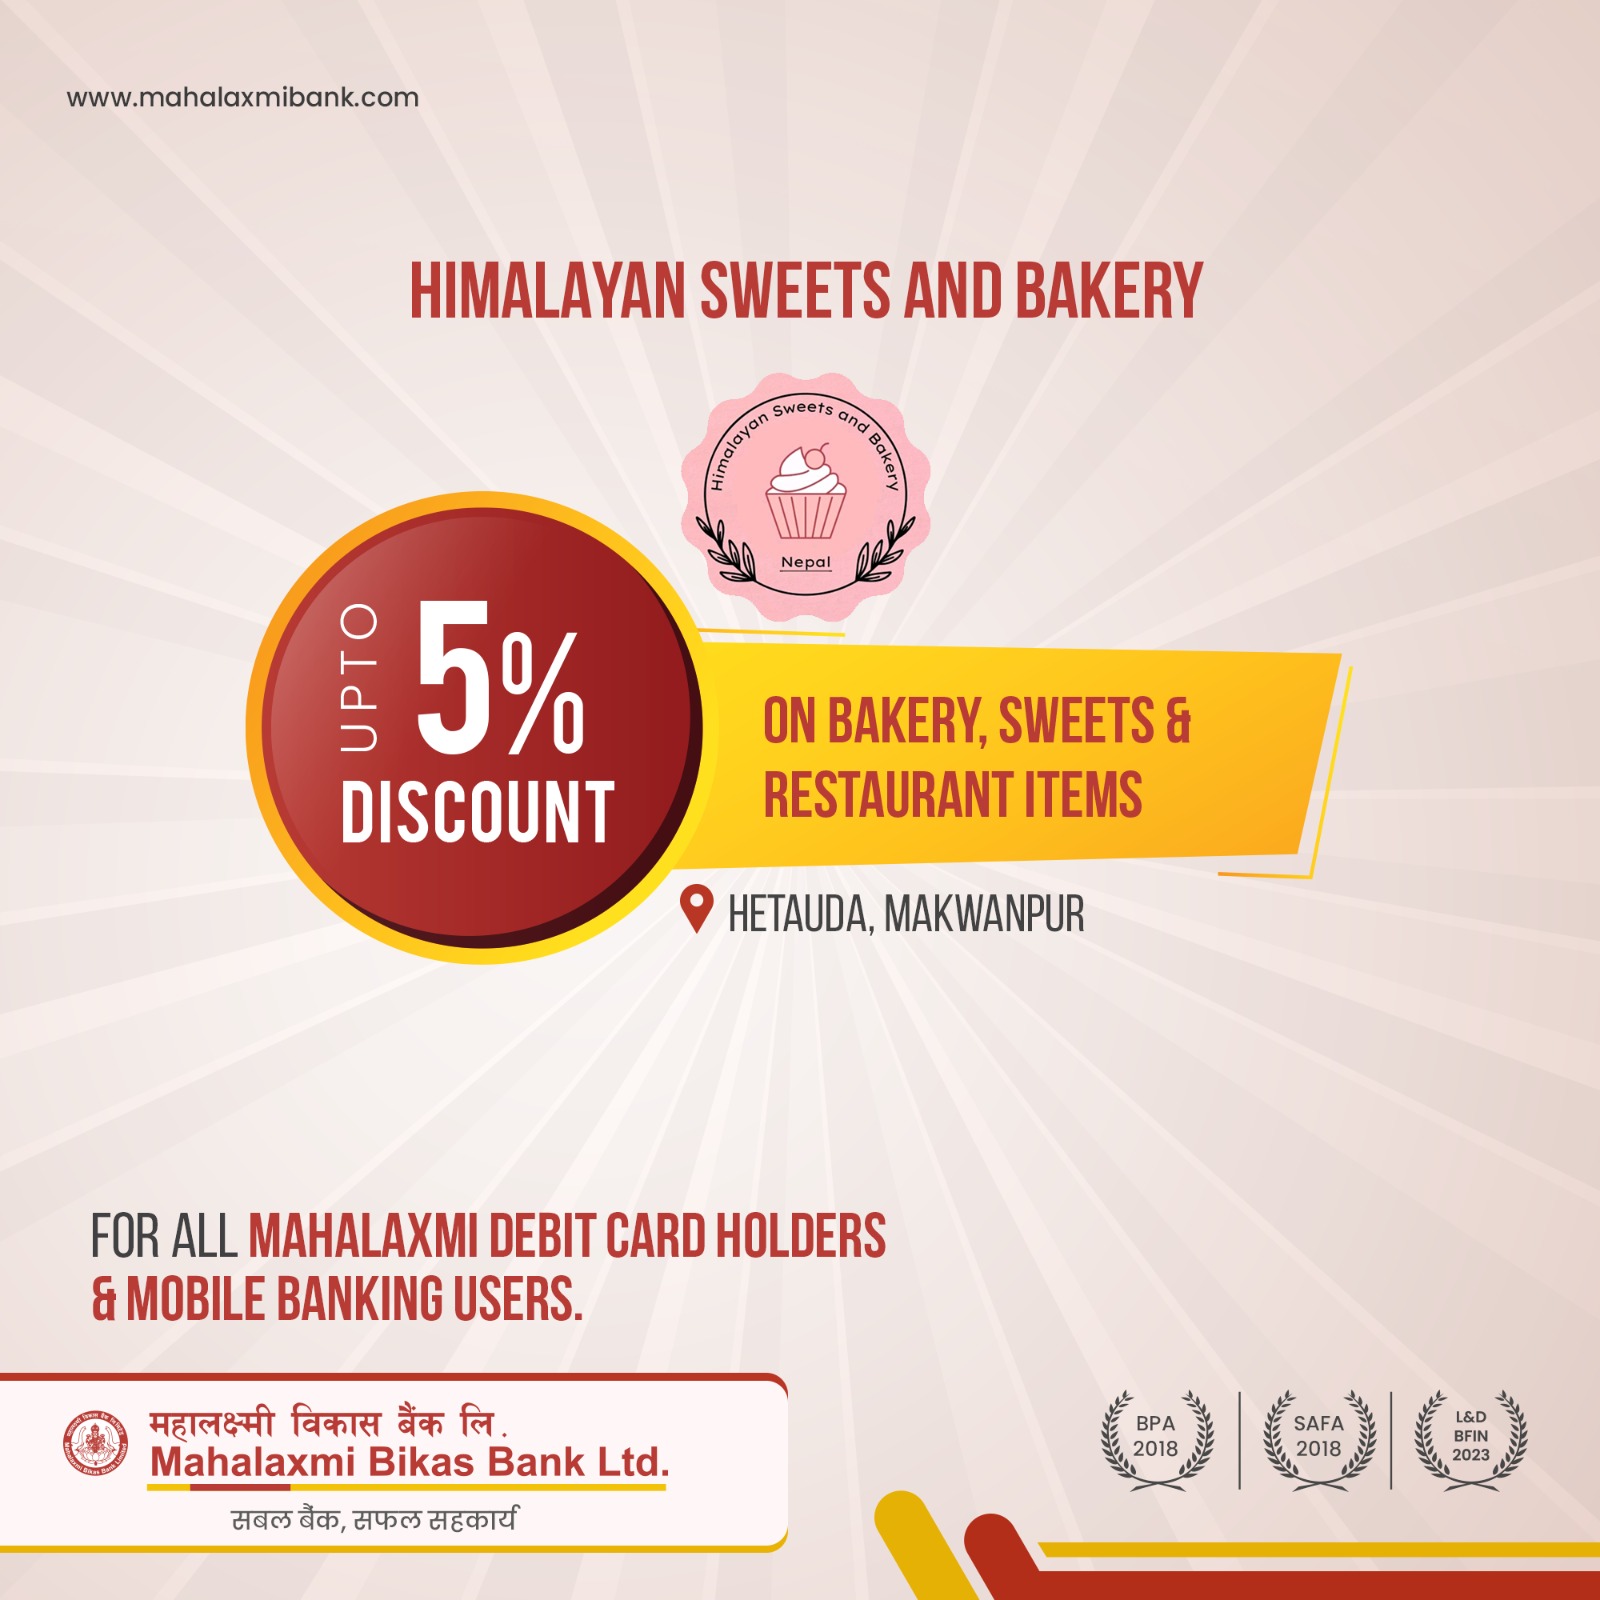 Himalayan Sweets and Bakery